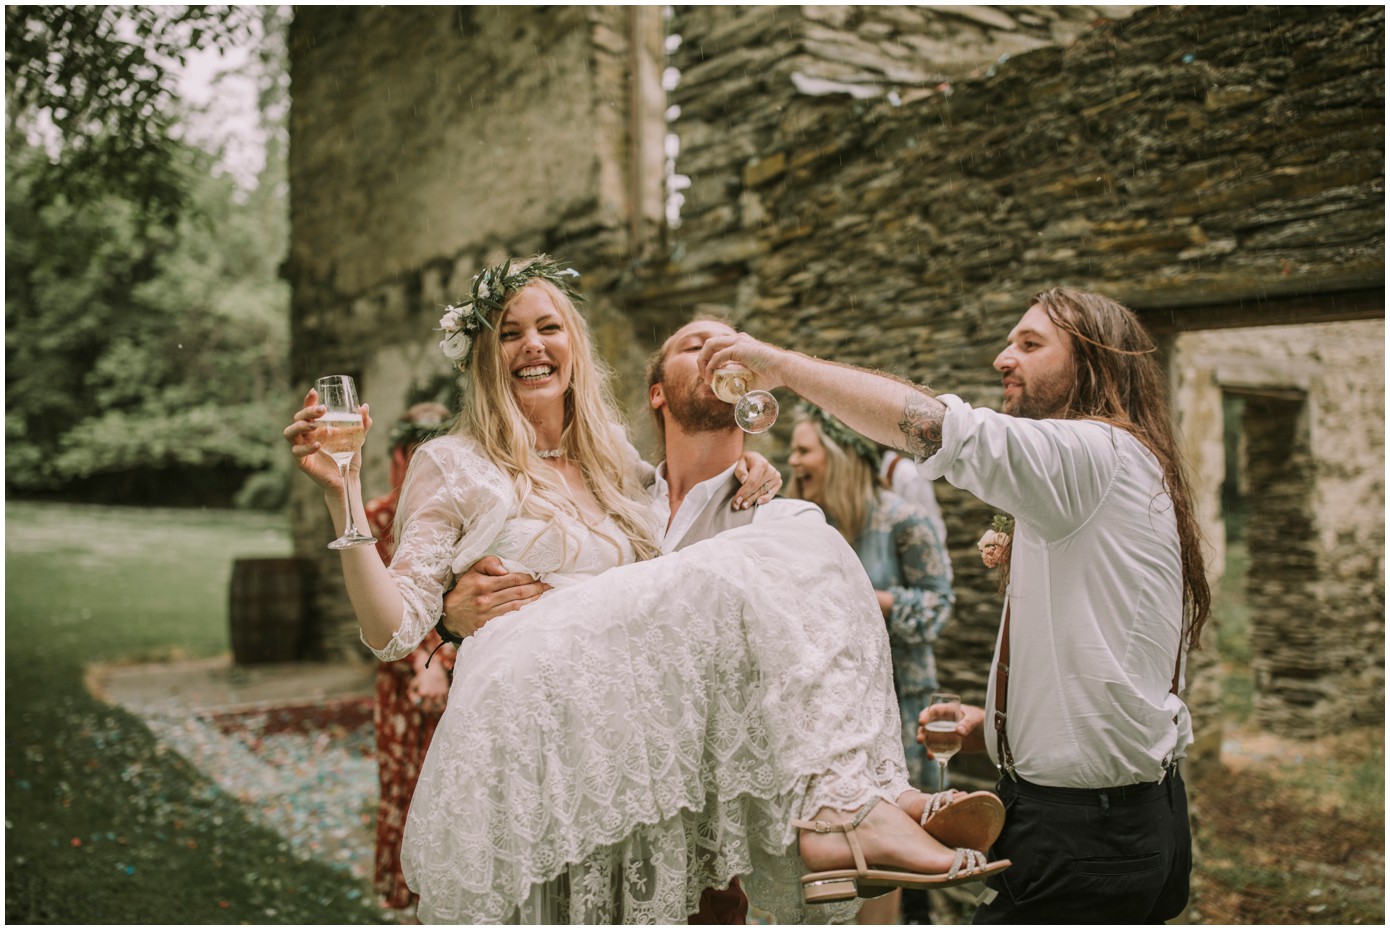 Charlotte Kiri Photography - Wedding Photography of a bohemian bride wearing a pretty lace dress, who is laughing, as her groom lifts her up, as they celebrate and drink champagne outside a rustic building at Thurlby Domain, Arrowtown, New Zealand.